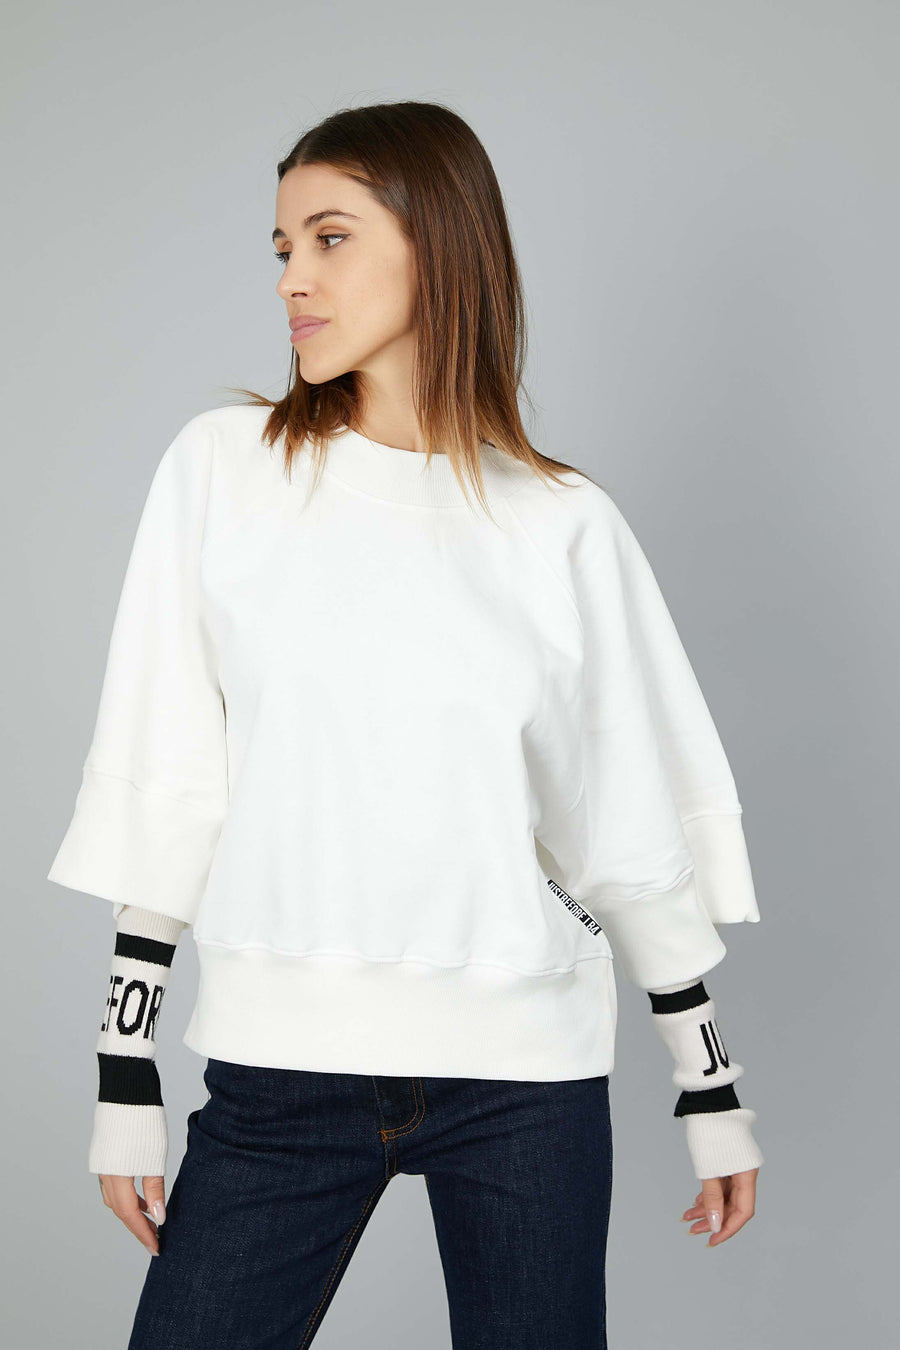 FLEECE CAPE WITH WHITE SLEEVES